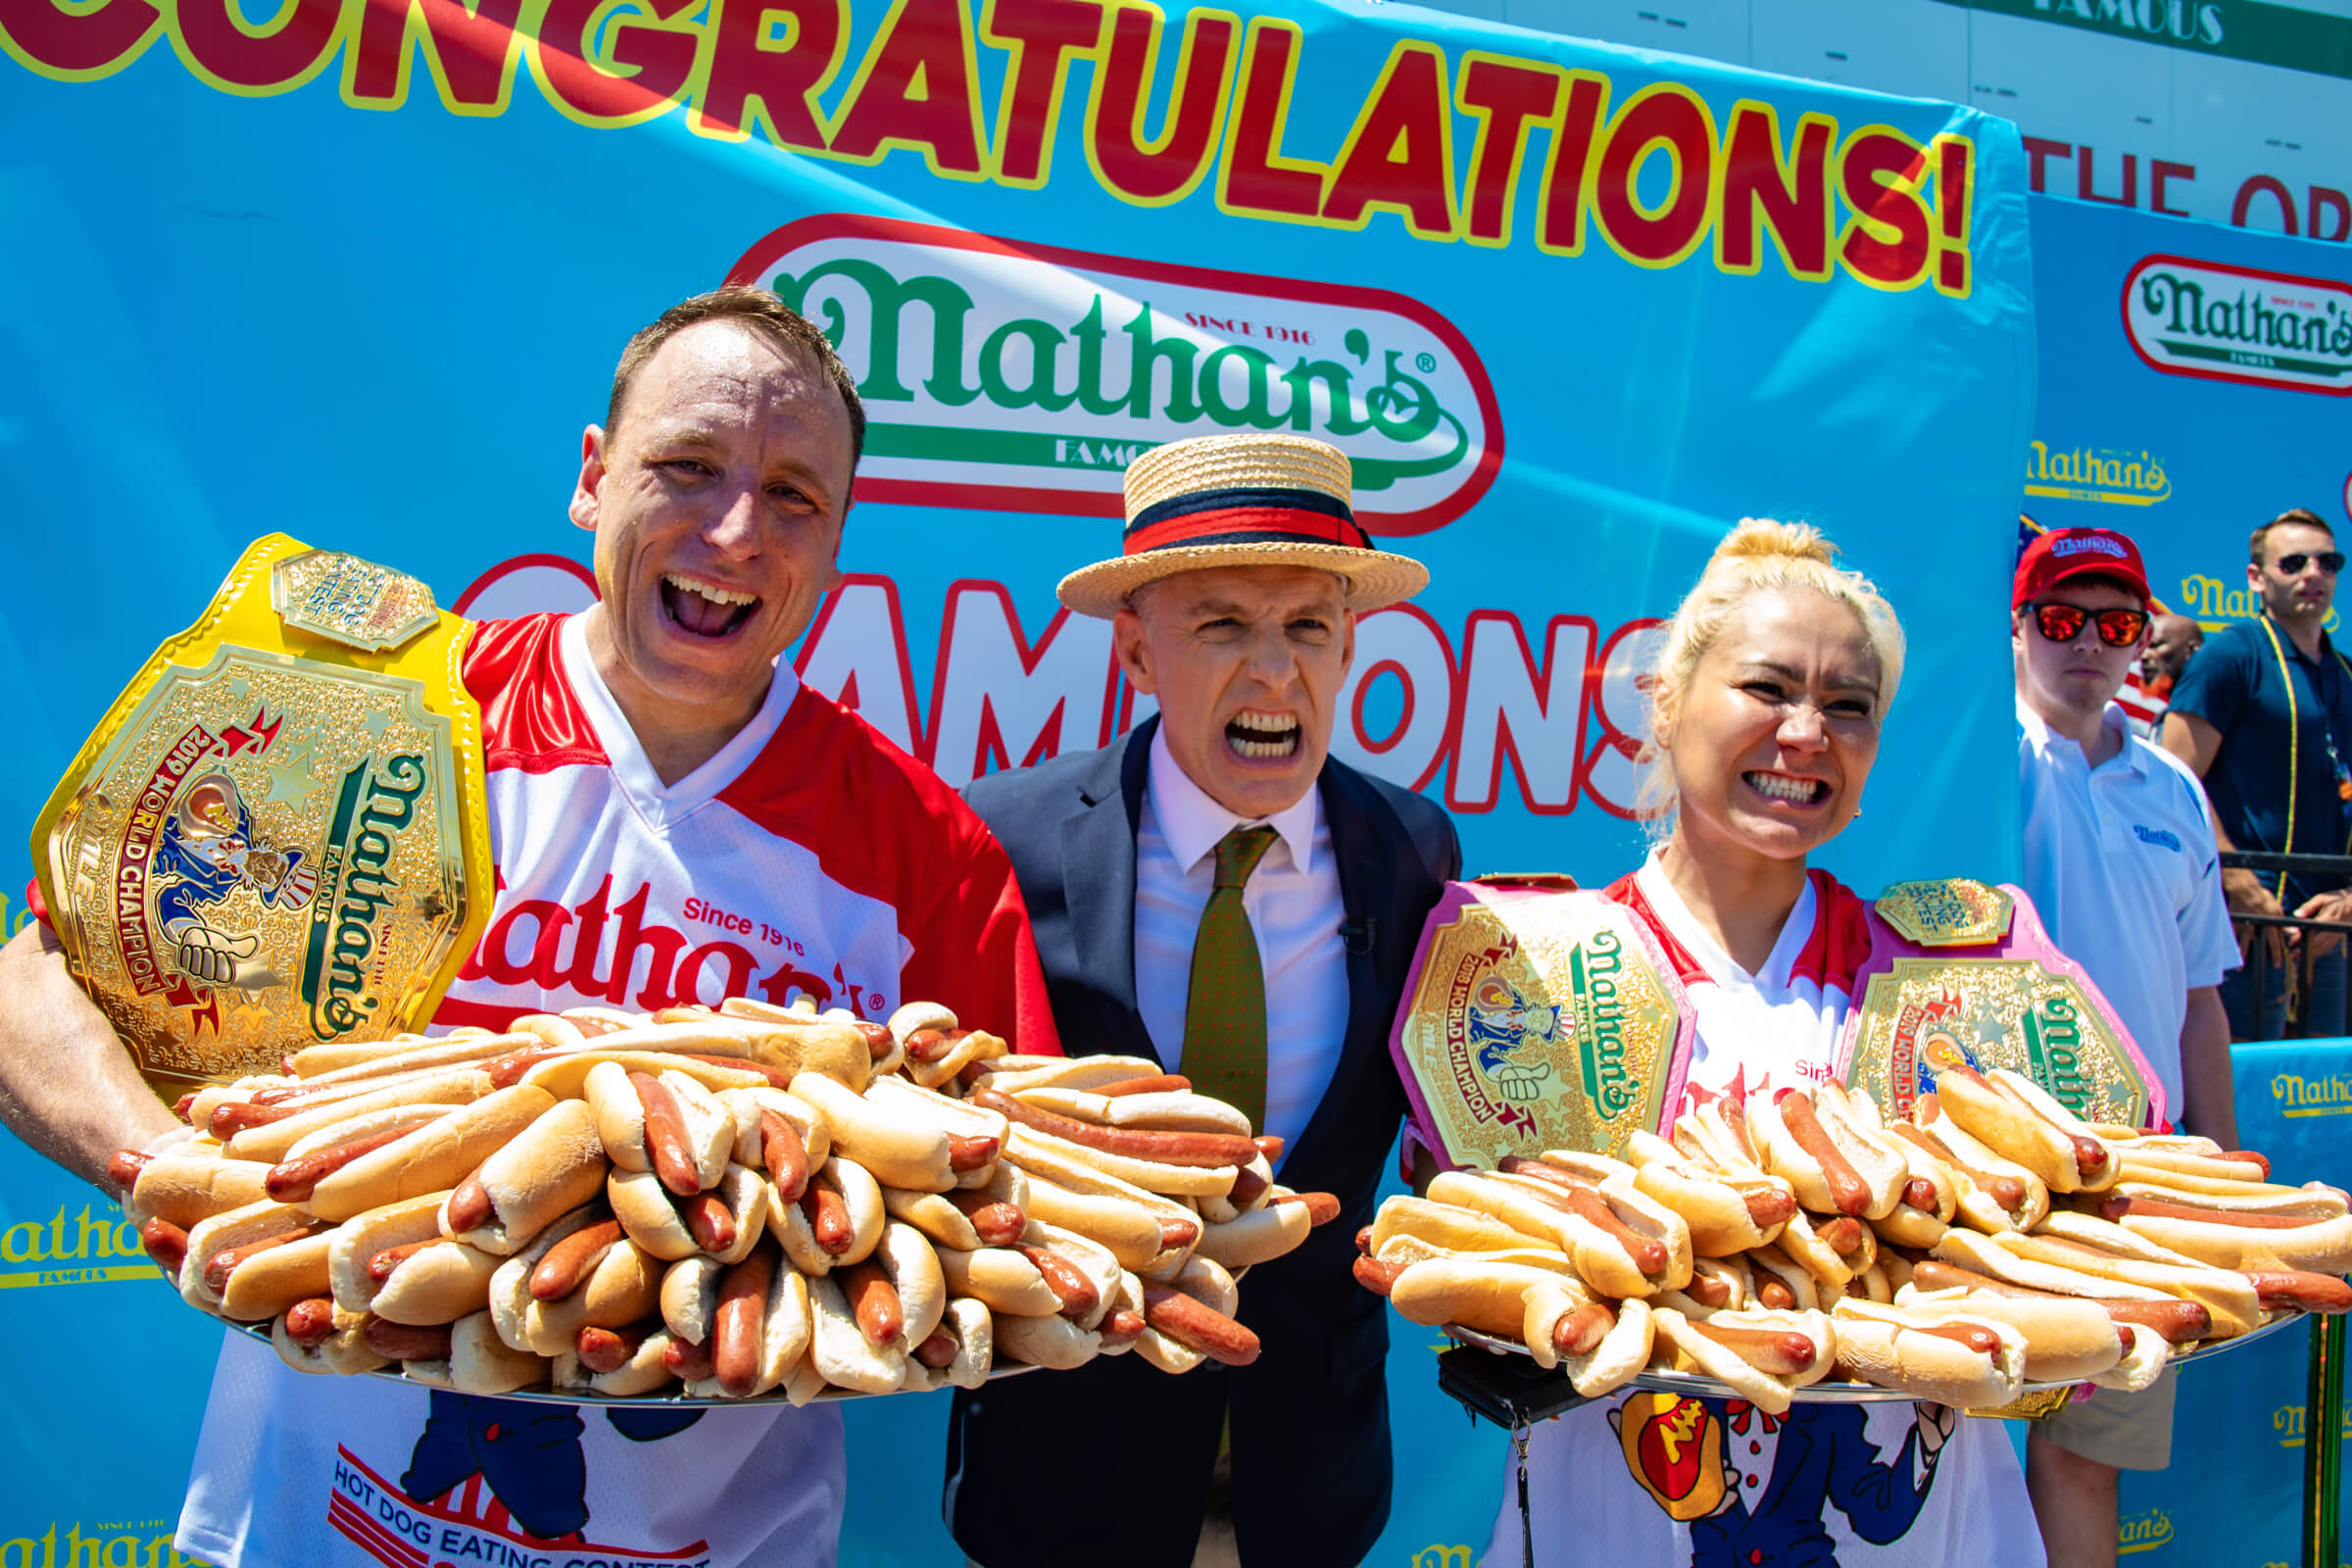 Joey wins Nathan's Hot Dog Eating downing 71 dogs 10 minutes - The Brooklyn Home Reporter